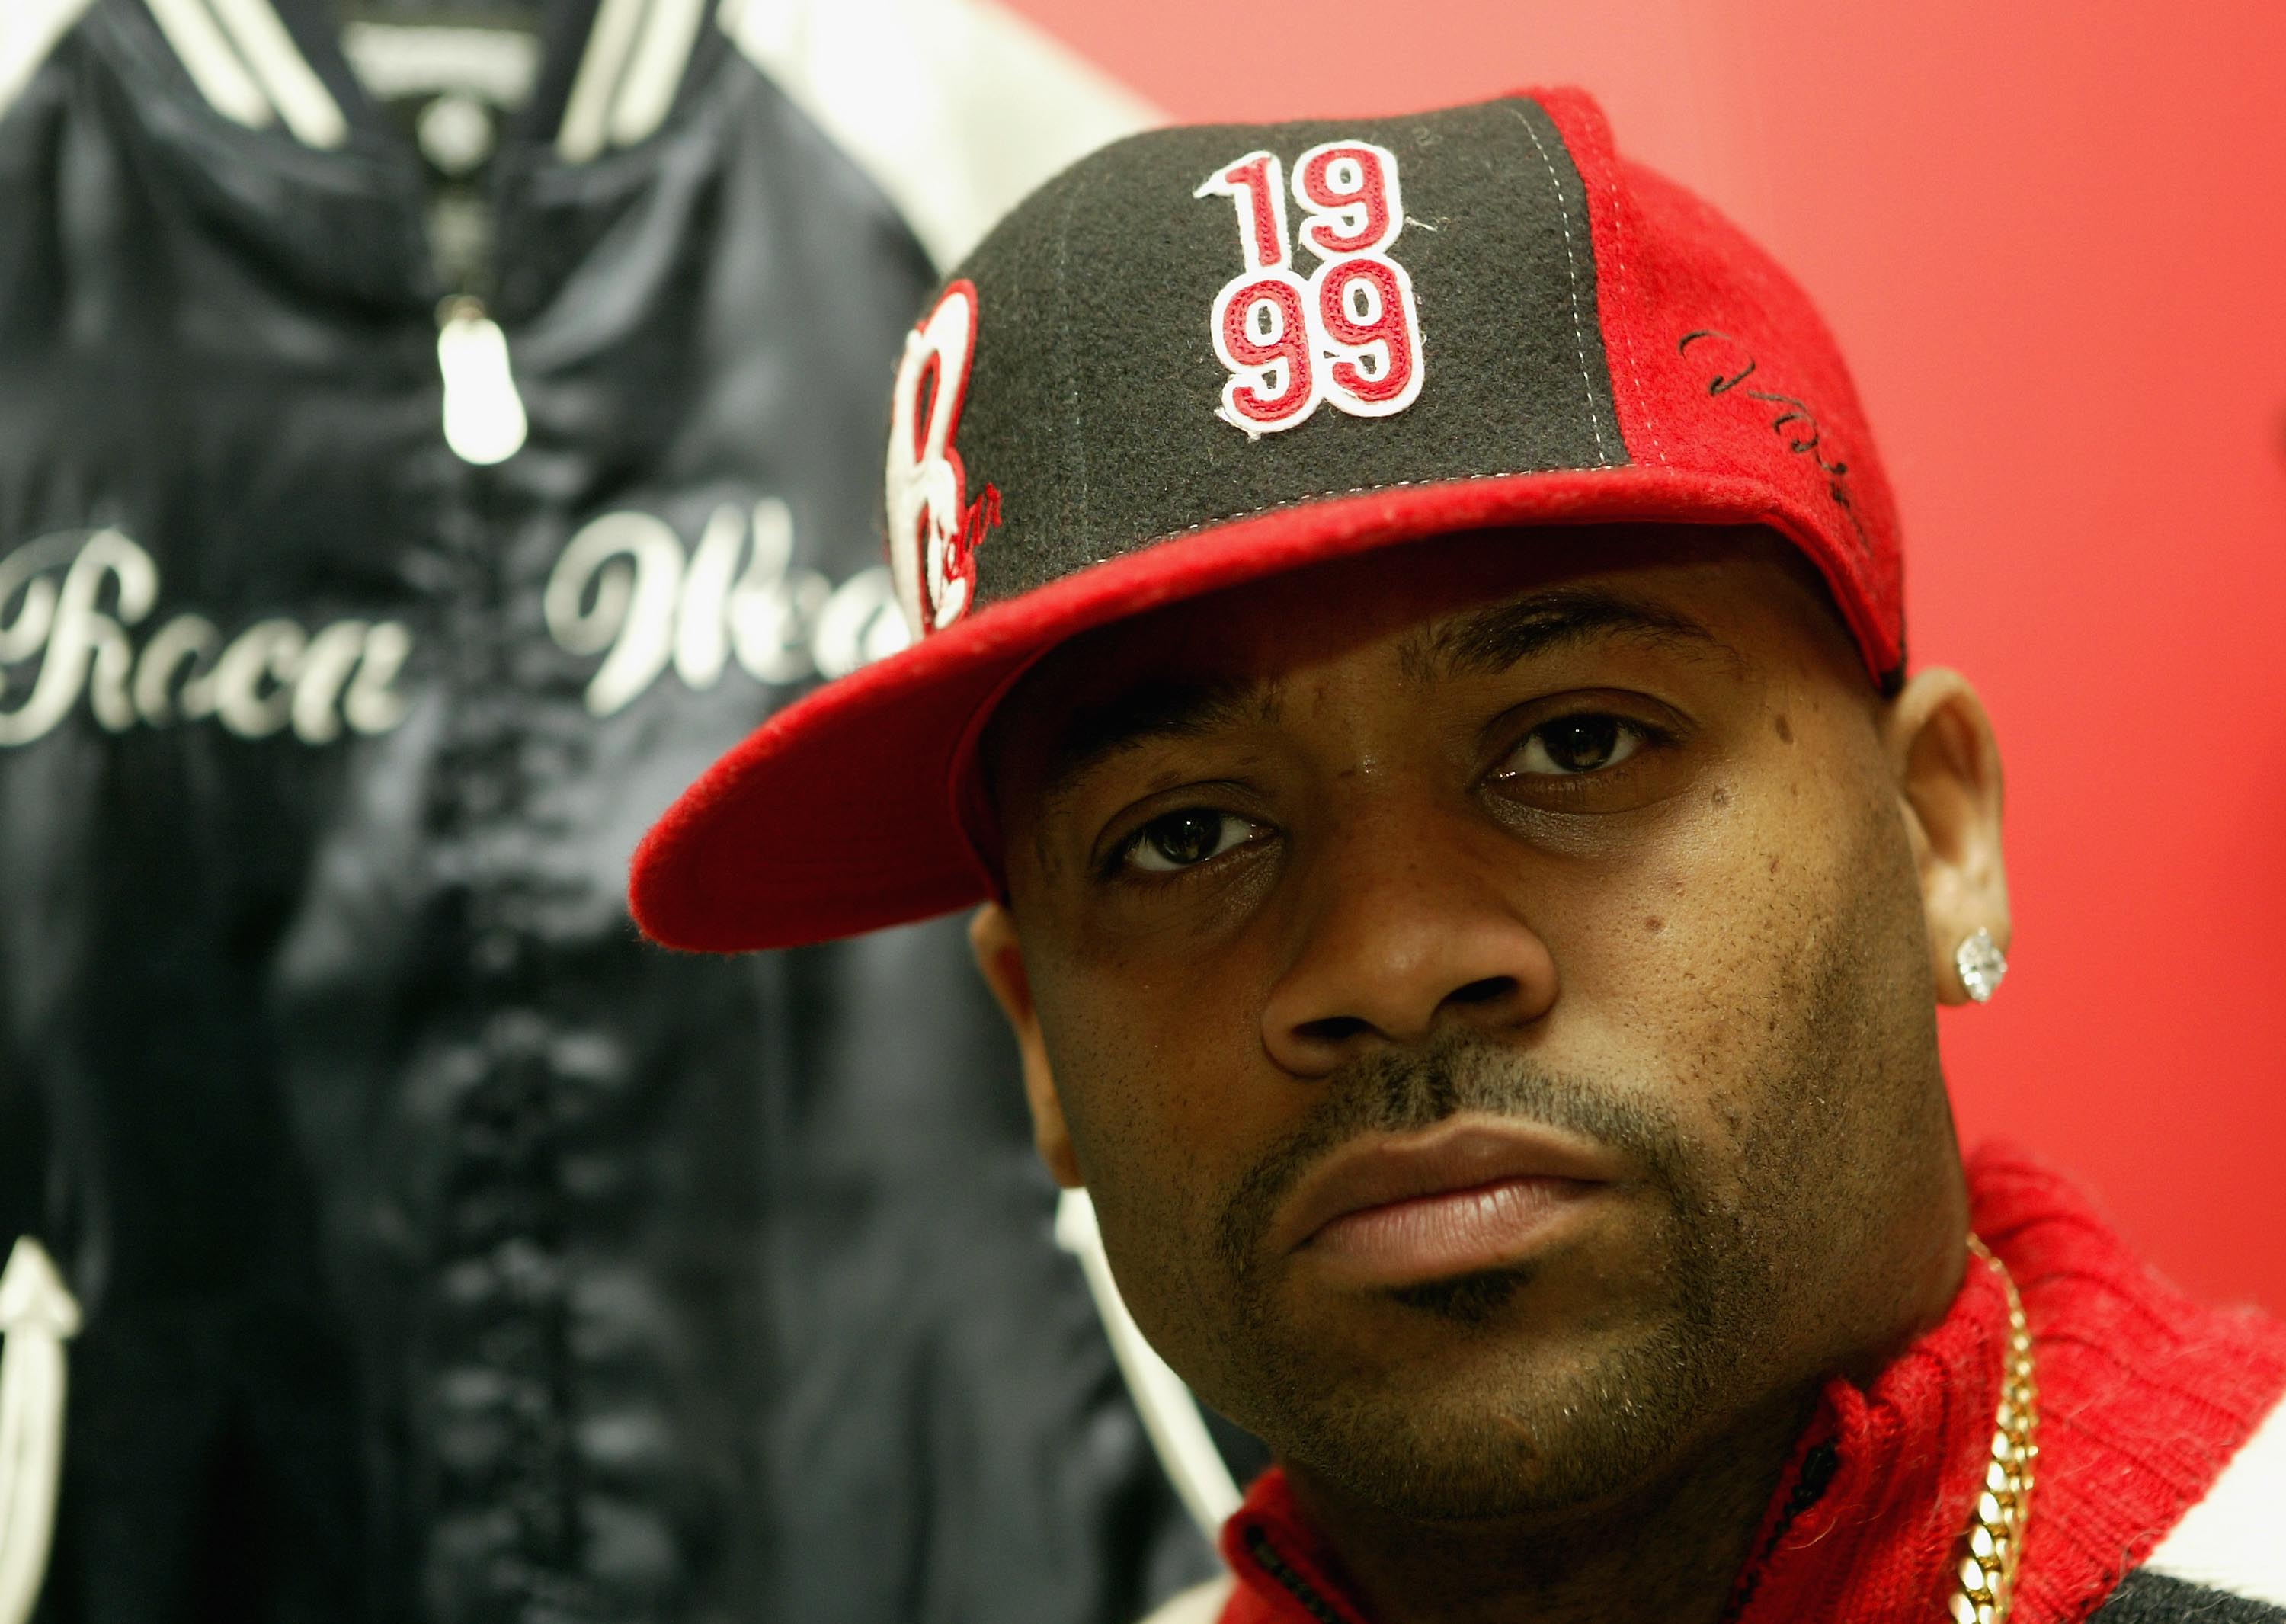 Dame Dash Reveals That Biggie Intended To Sign With Roc-A-Fella